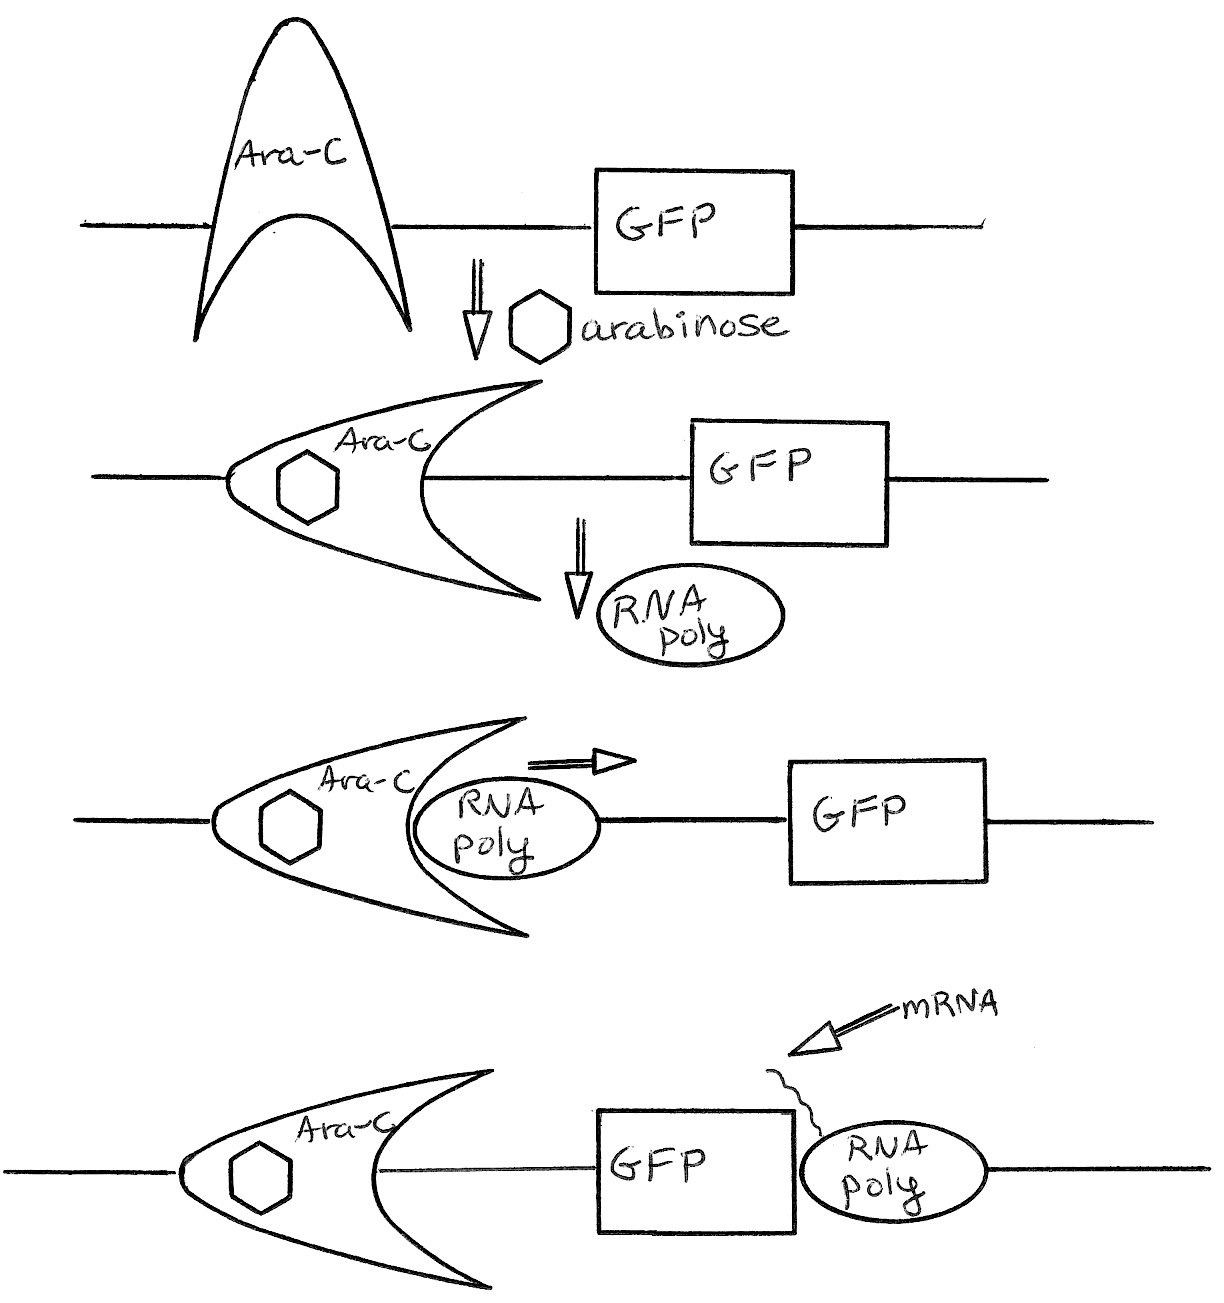 GFP Gene Expression